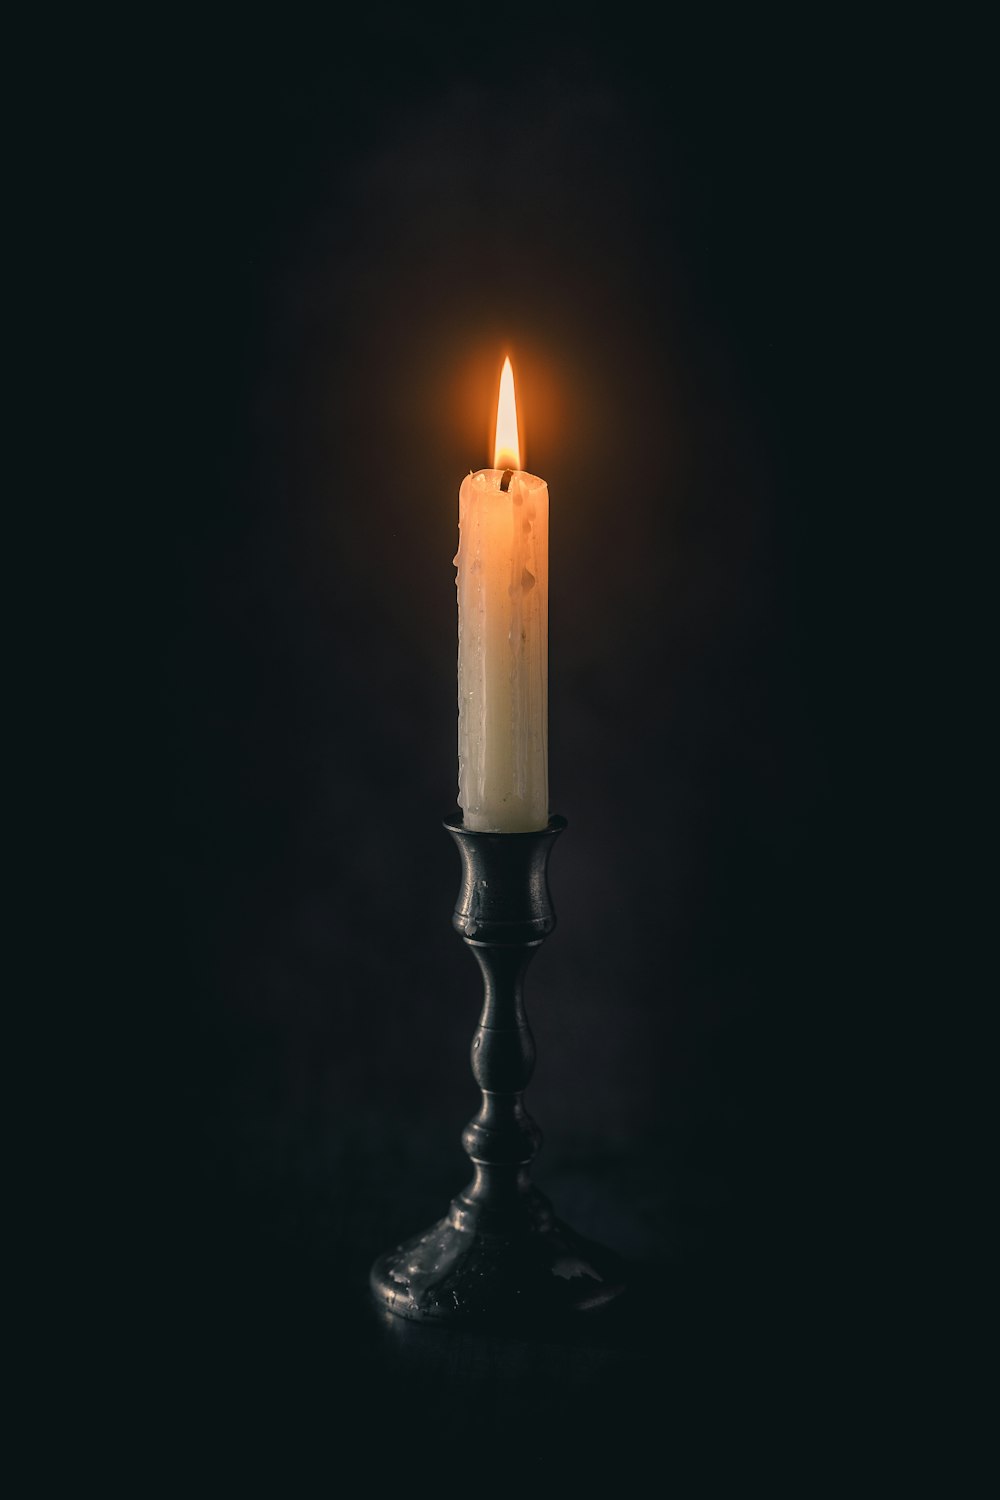 a single candle is lit in the dark